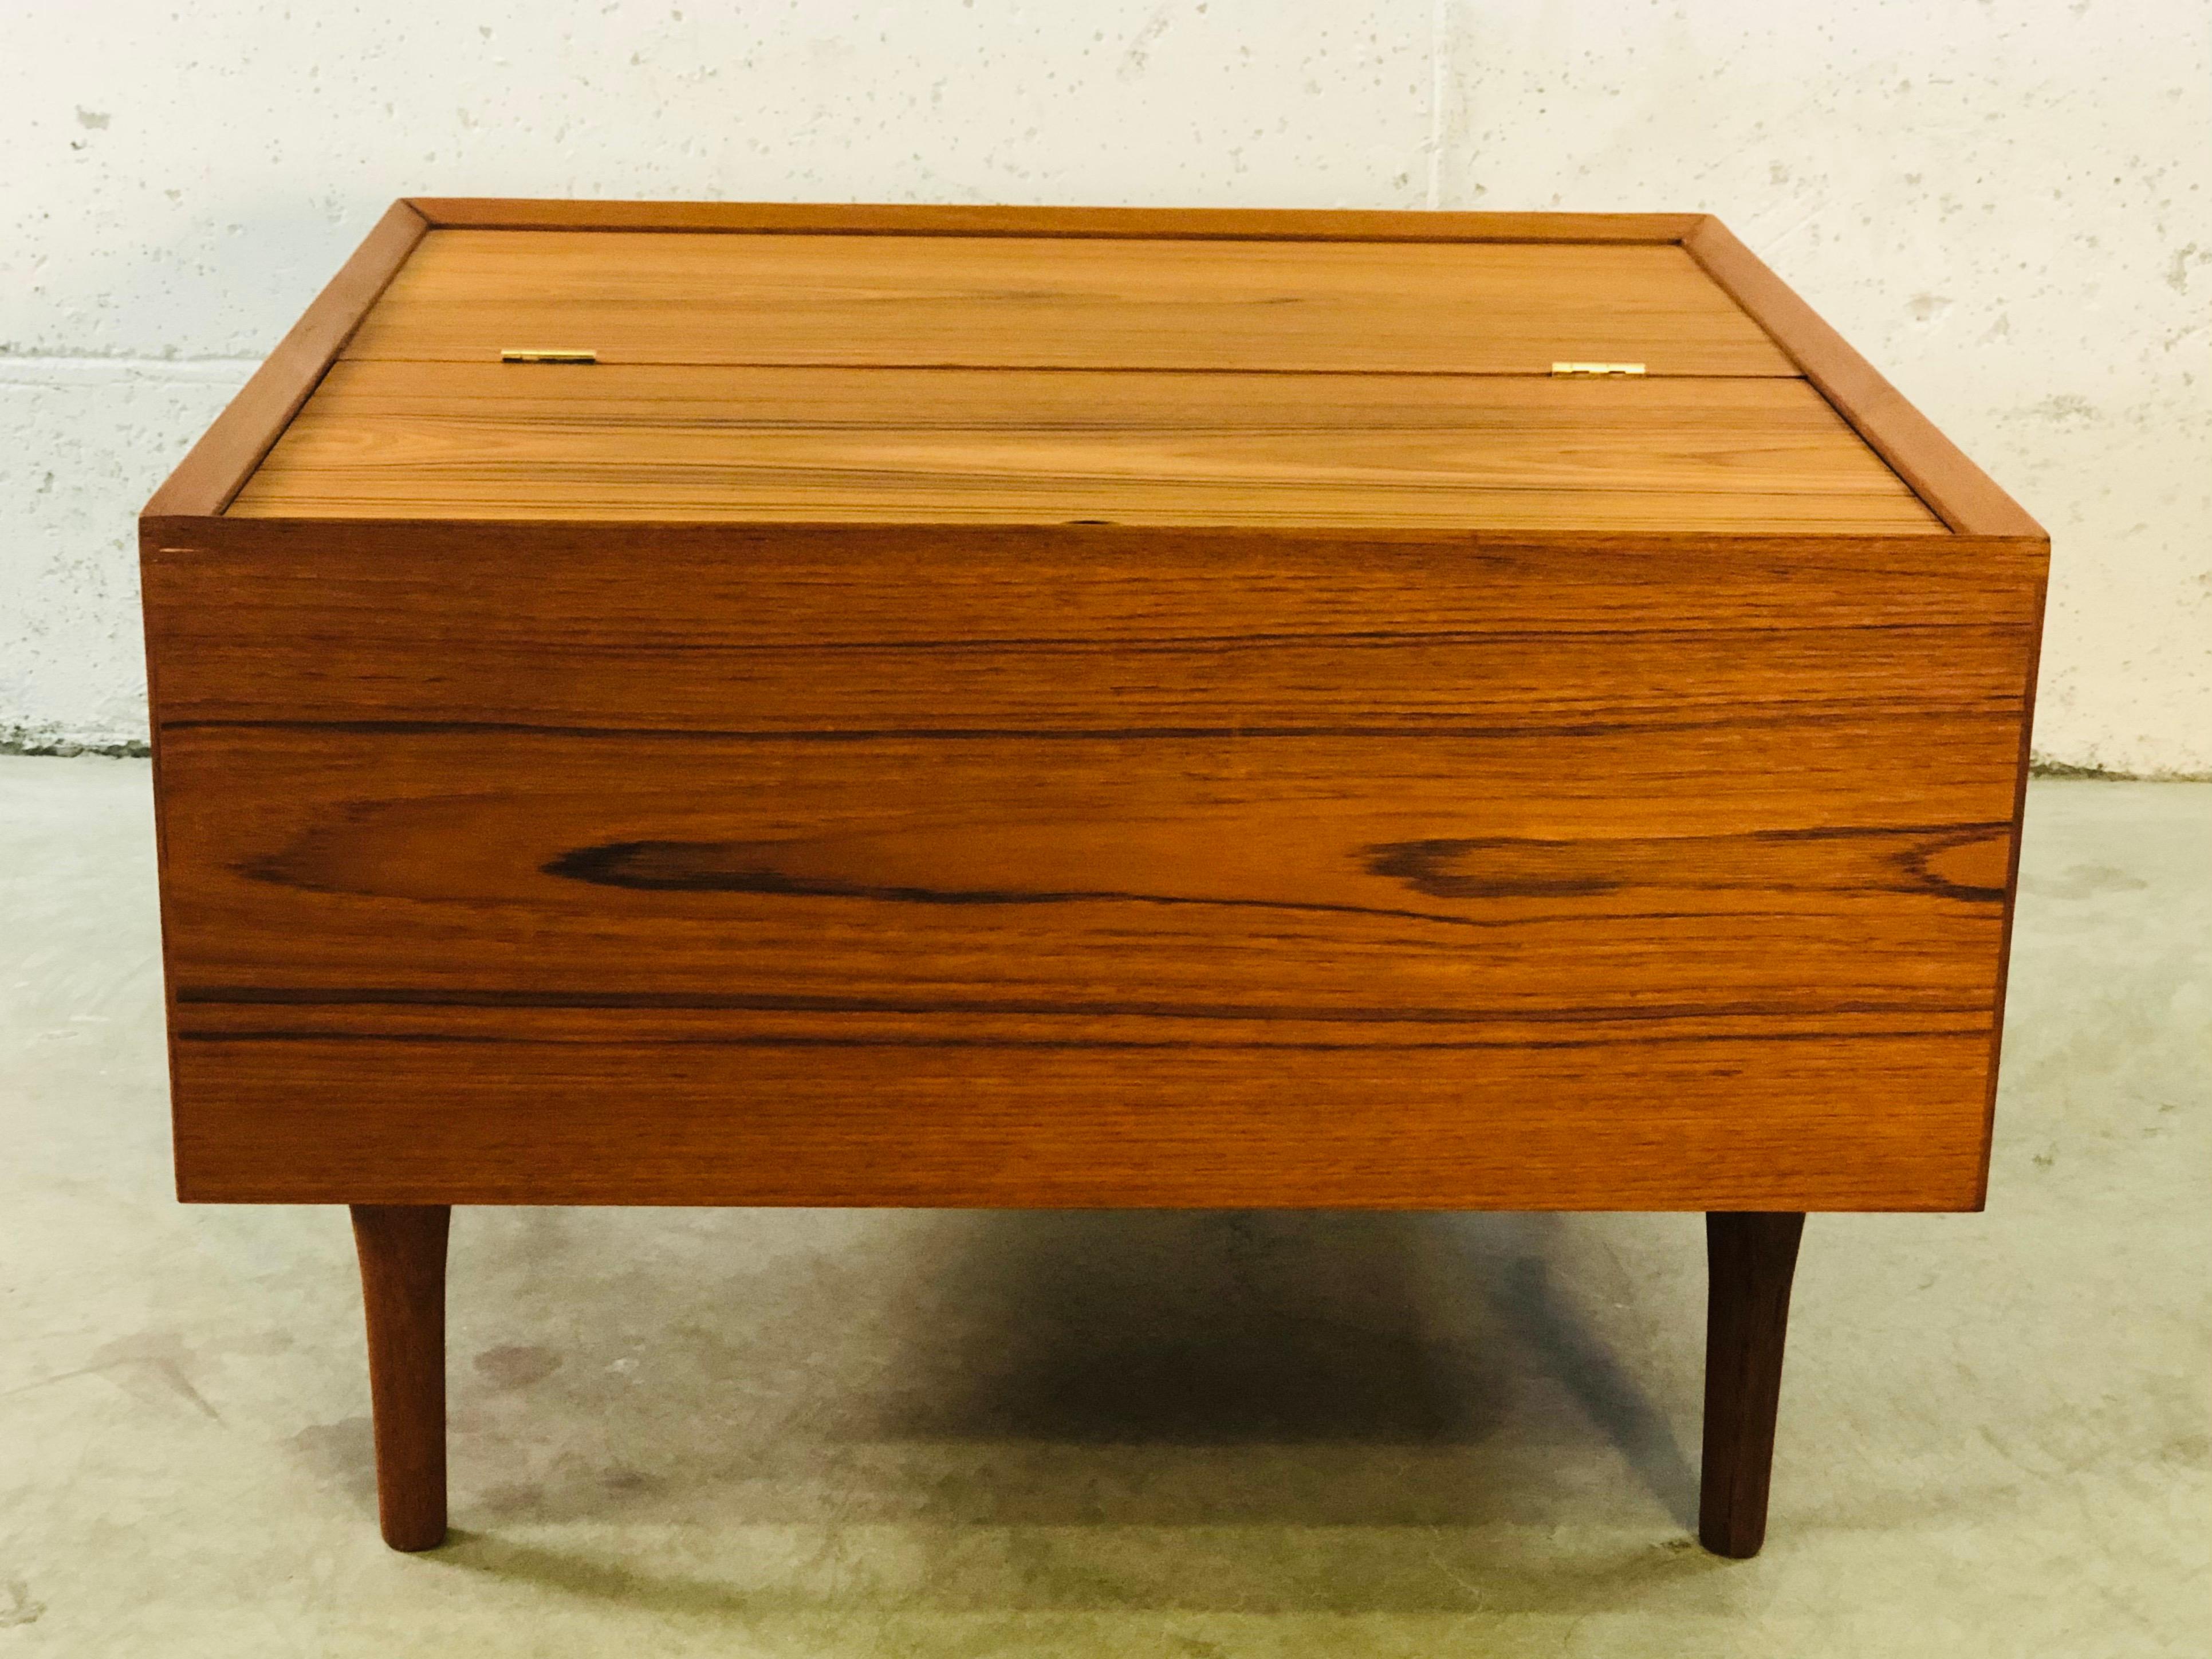 Vintage 1960s Danish teak square storage coffee table with flip top door. The table has a birch wood interior and round teak legs. Lots of interior storage room and one side flips up to reveal the opening. No marks. Refinished condition.